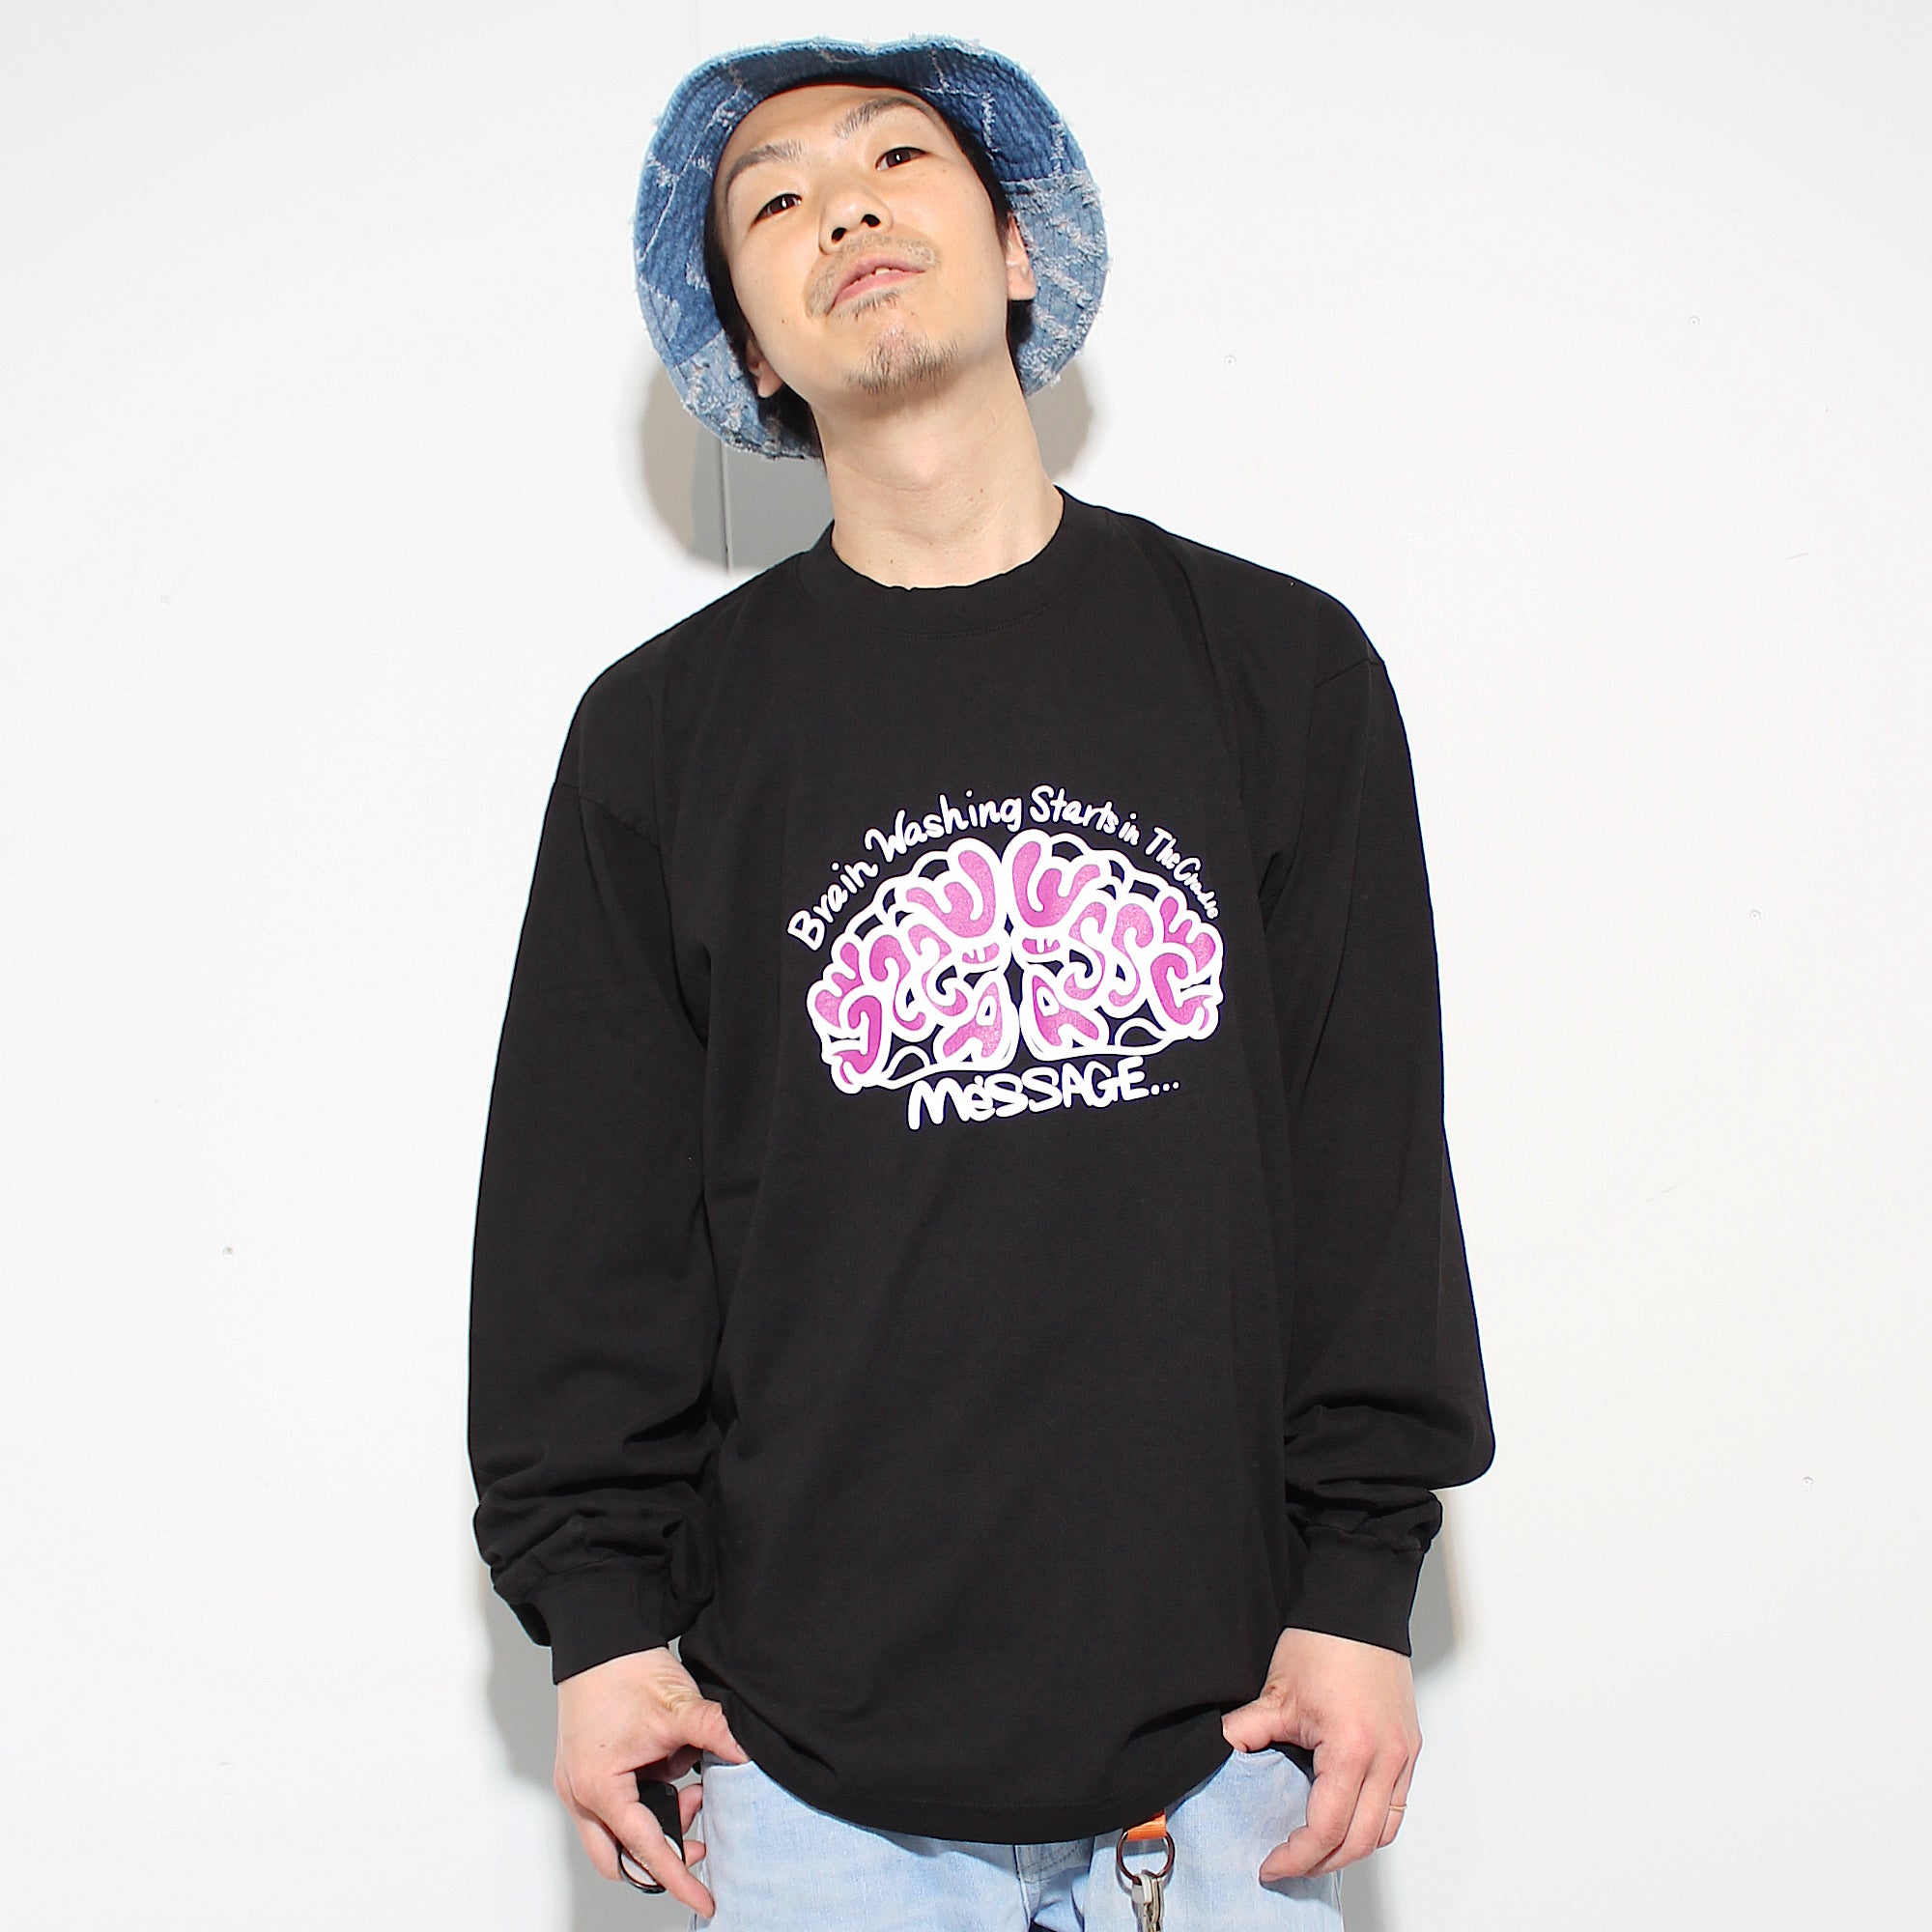 【Me'SSAGE】One's Head L/S